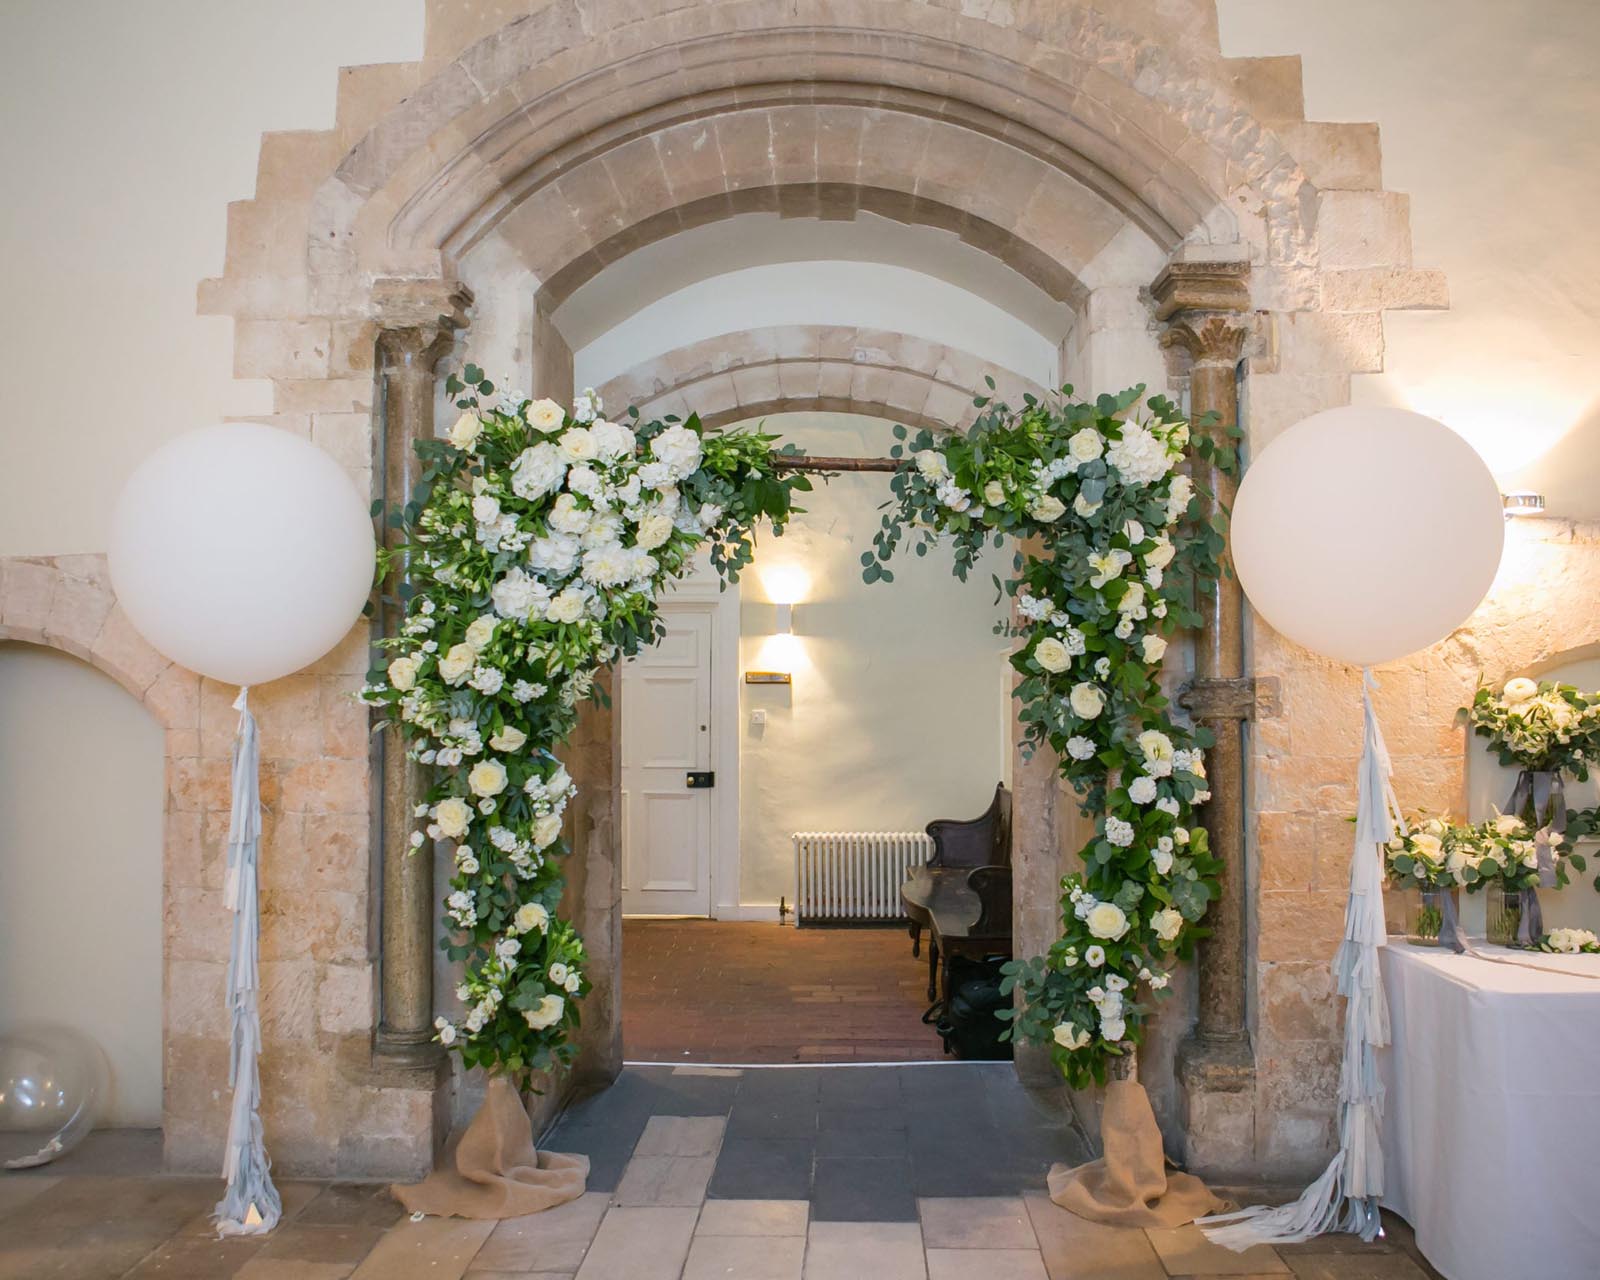 Floral arrangement over the arch in to Farnham Castle